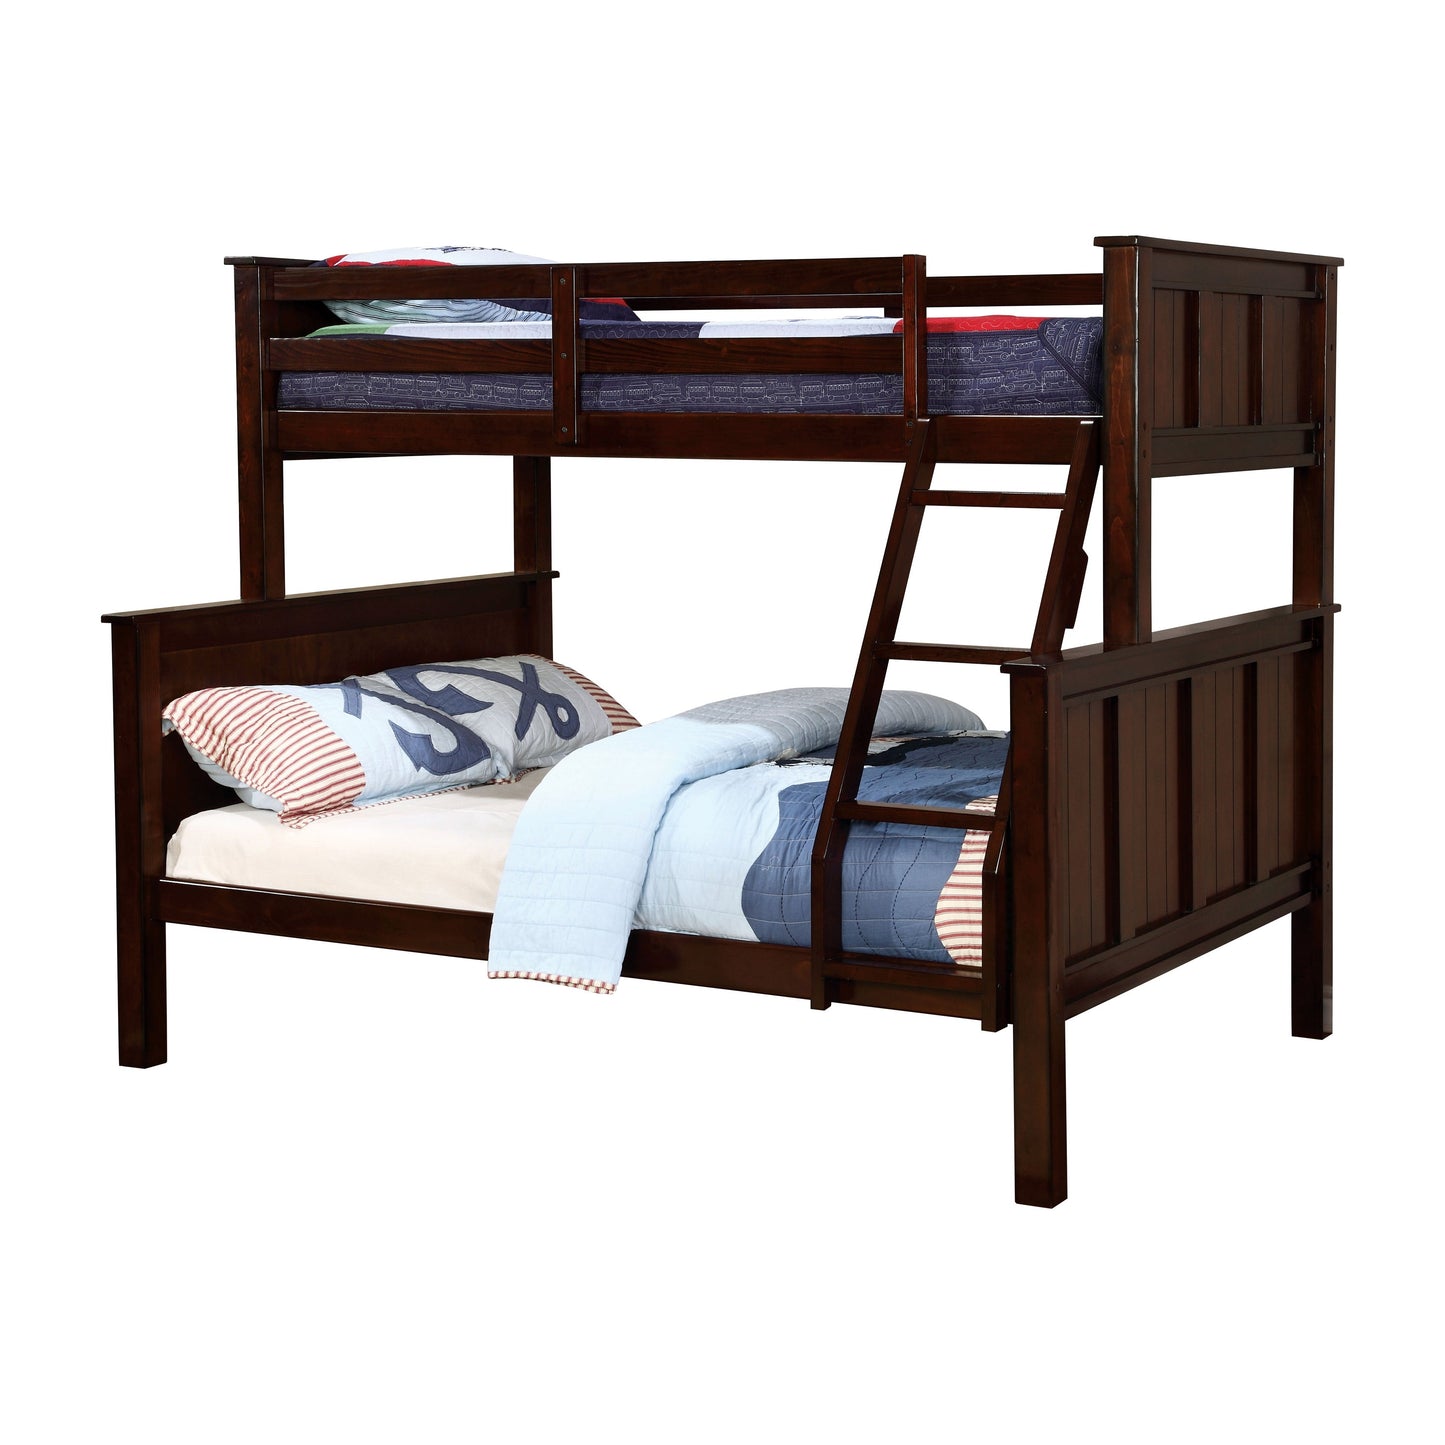 Joshel Transitional Solid Wood Bunk Bed in Twin over Full